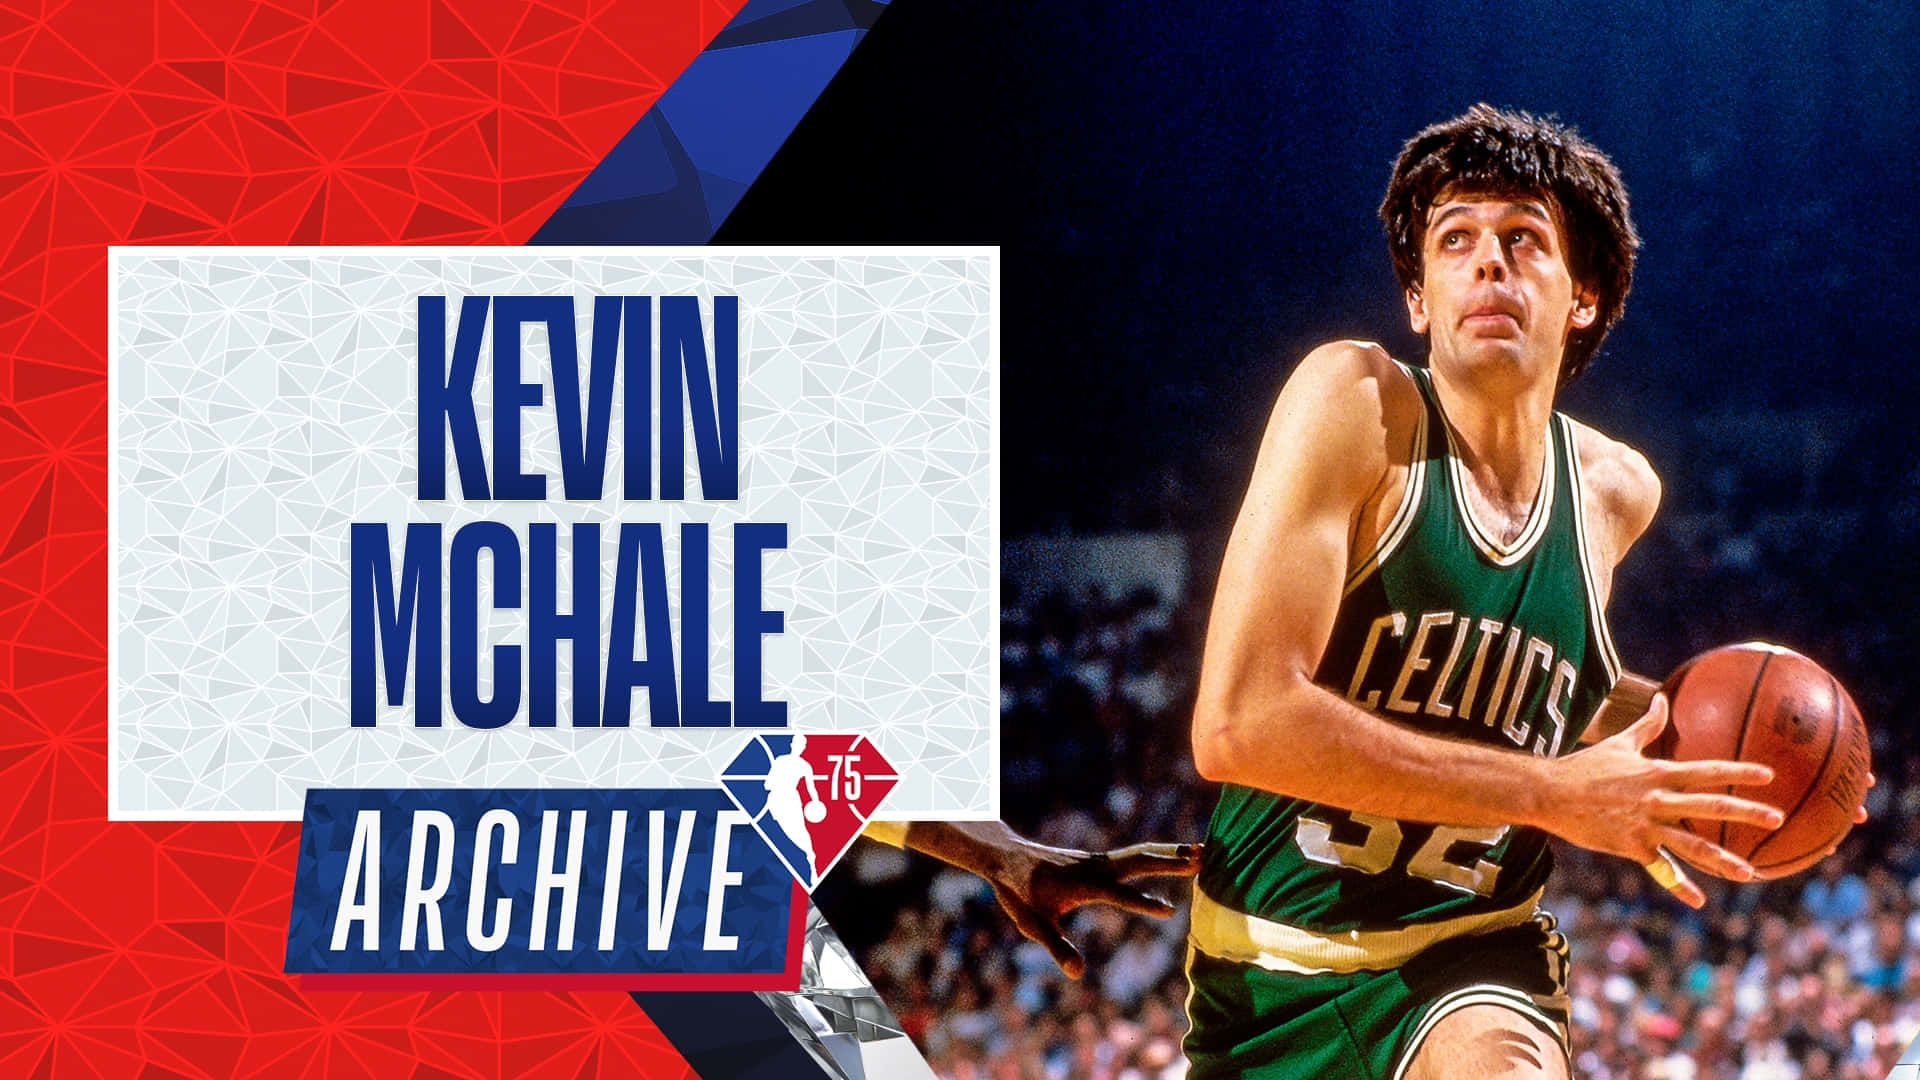 100+] Kevin Mchale Wallpapers